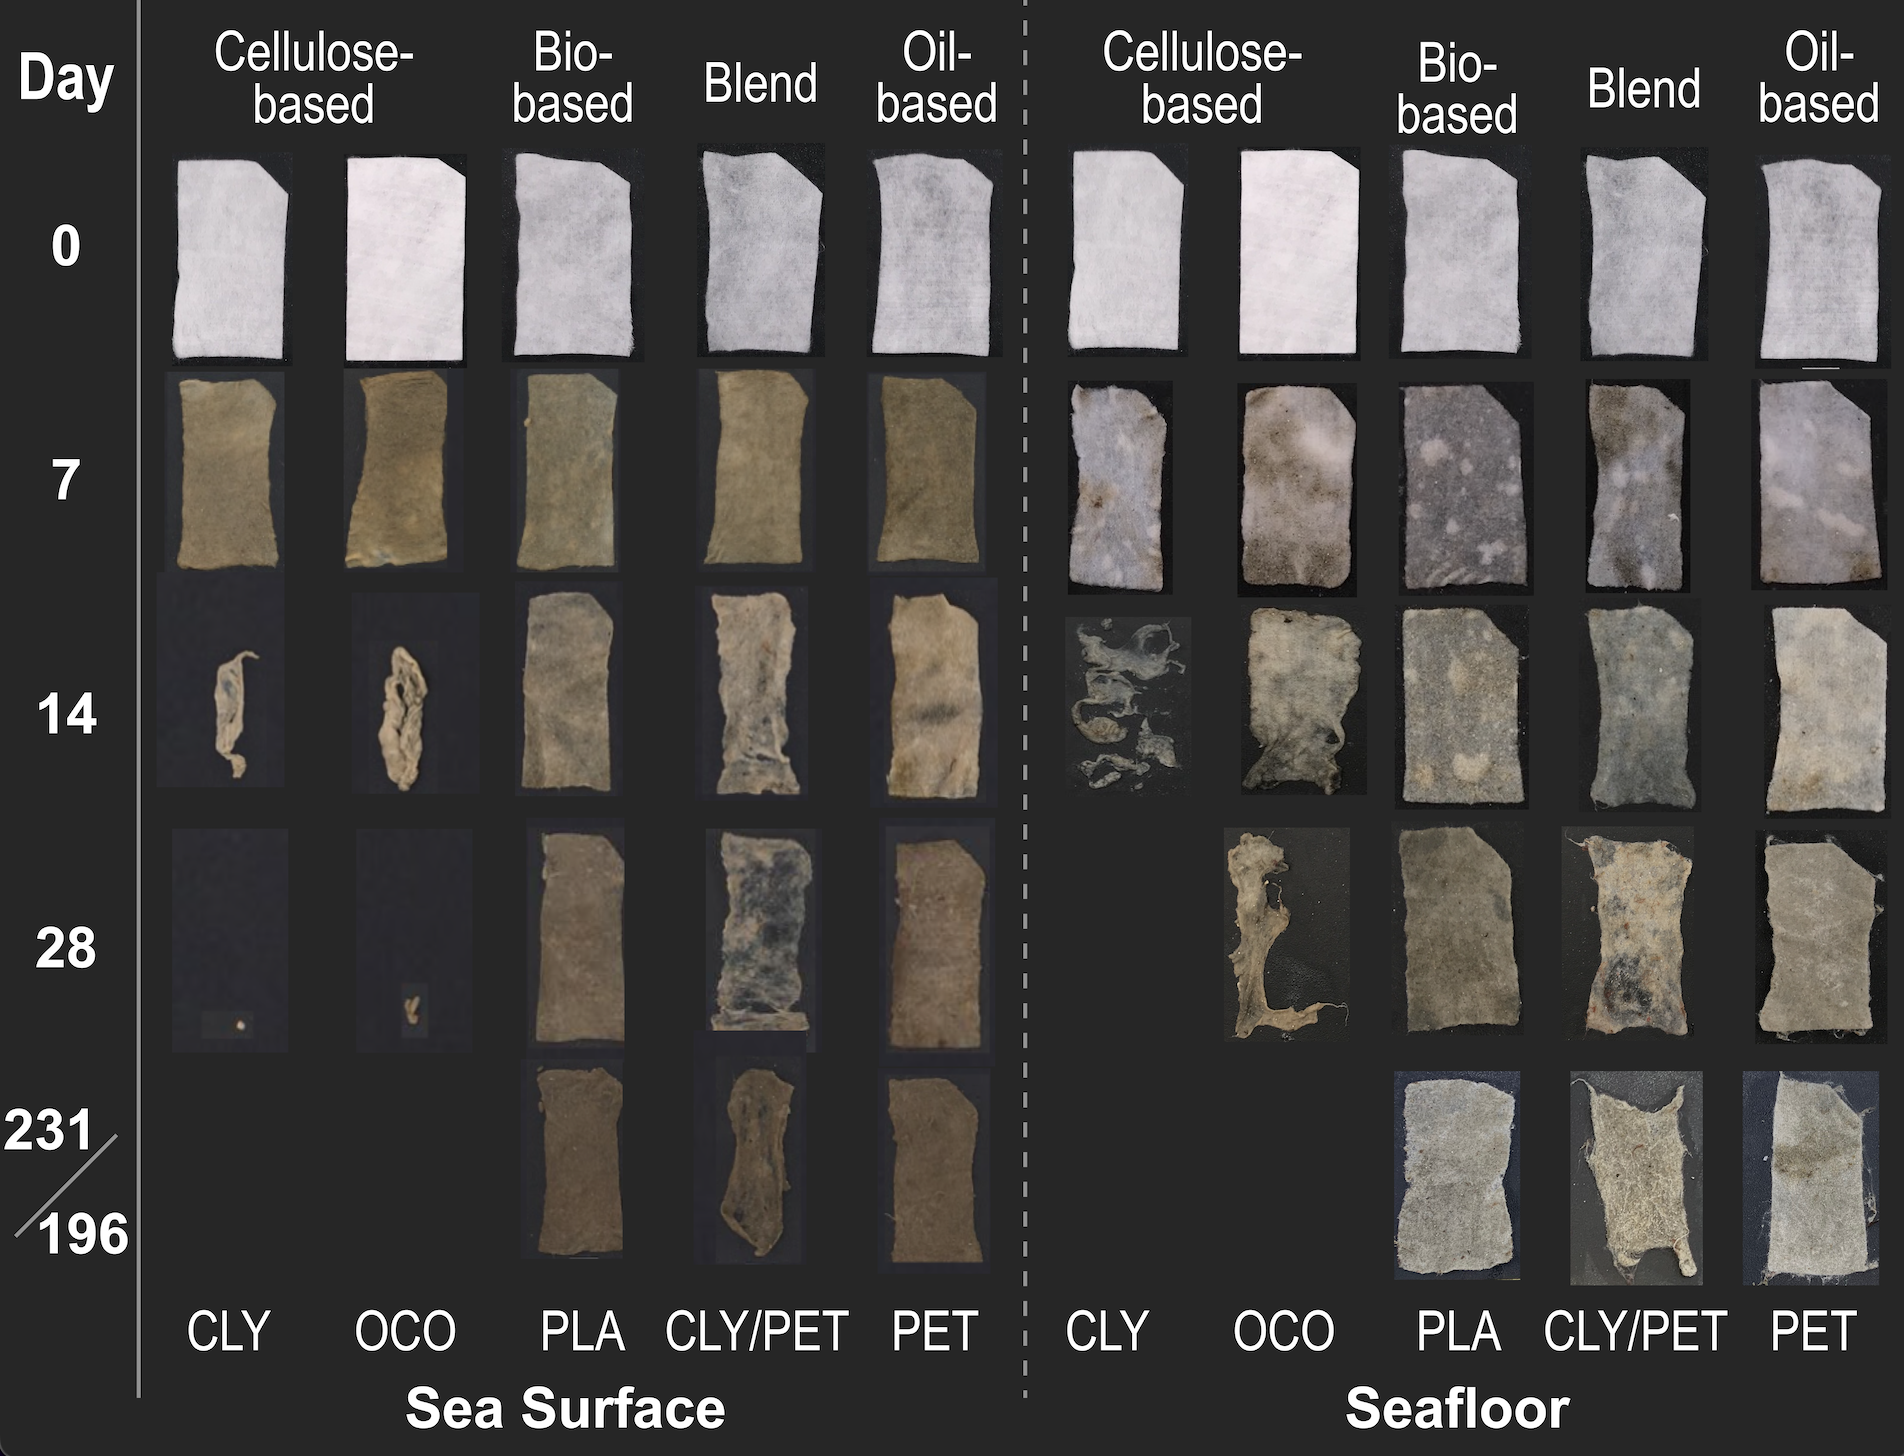 The types of material and their corresponding wear and tear after a number of days.  (Graphic: Scripps Institution of Oceanography/PLOS One)